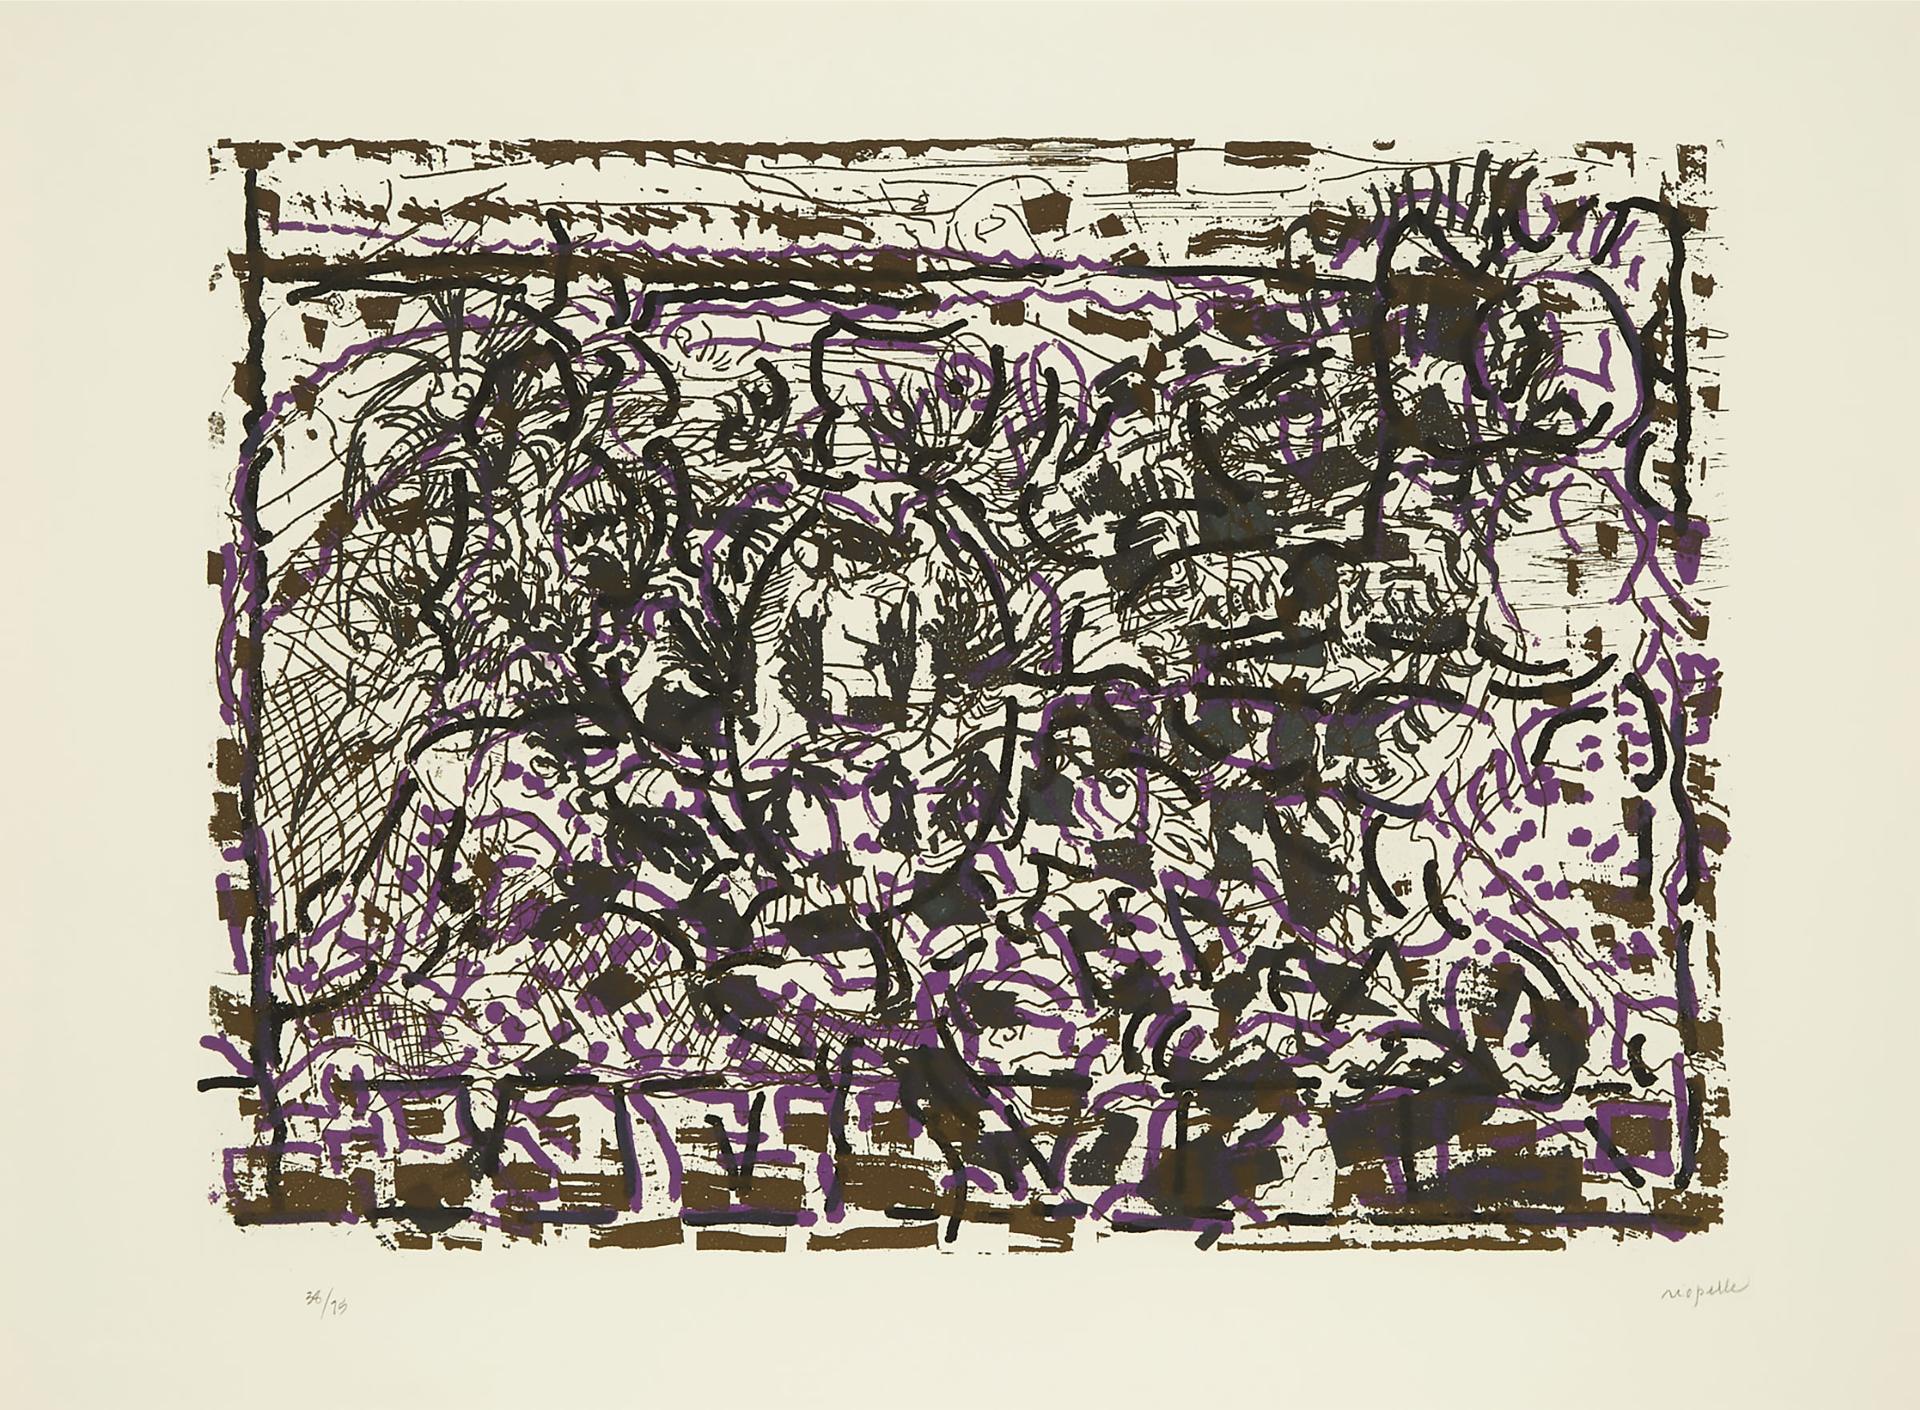 Jean-Paul Riopelle (1923-2002) - Qu'a Tord Son Linge (Serie Dommage), 1990 [yseult Riopelle, 1990.05est.Gr]